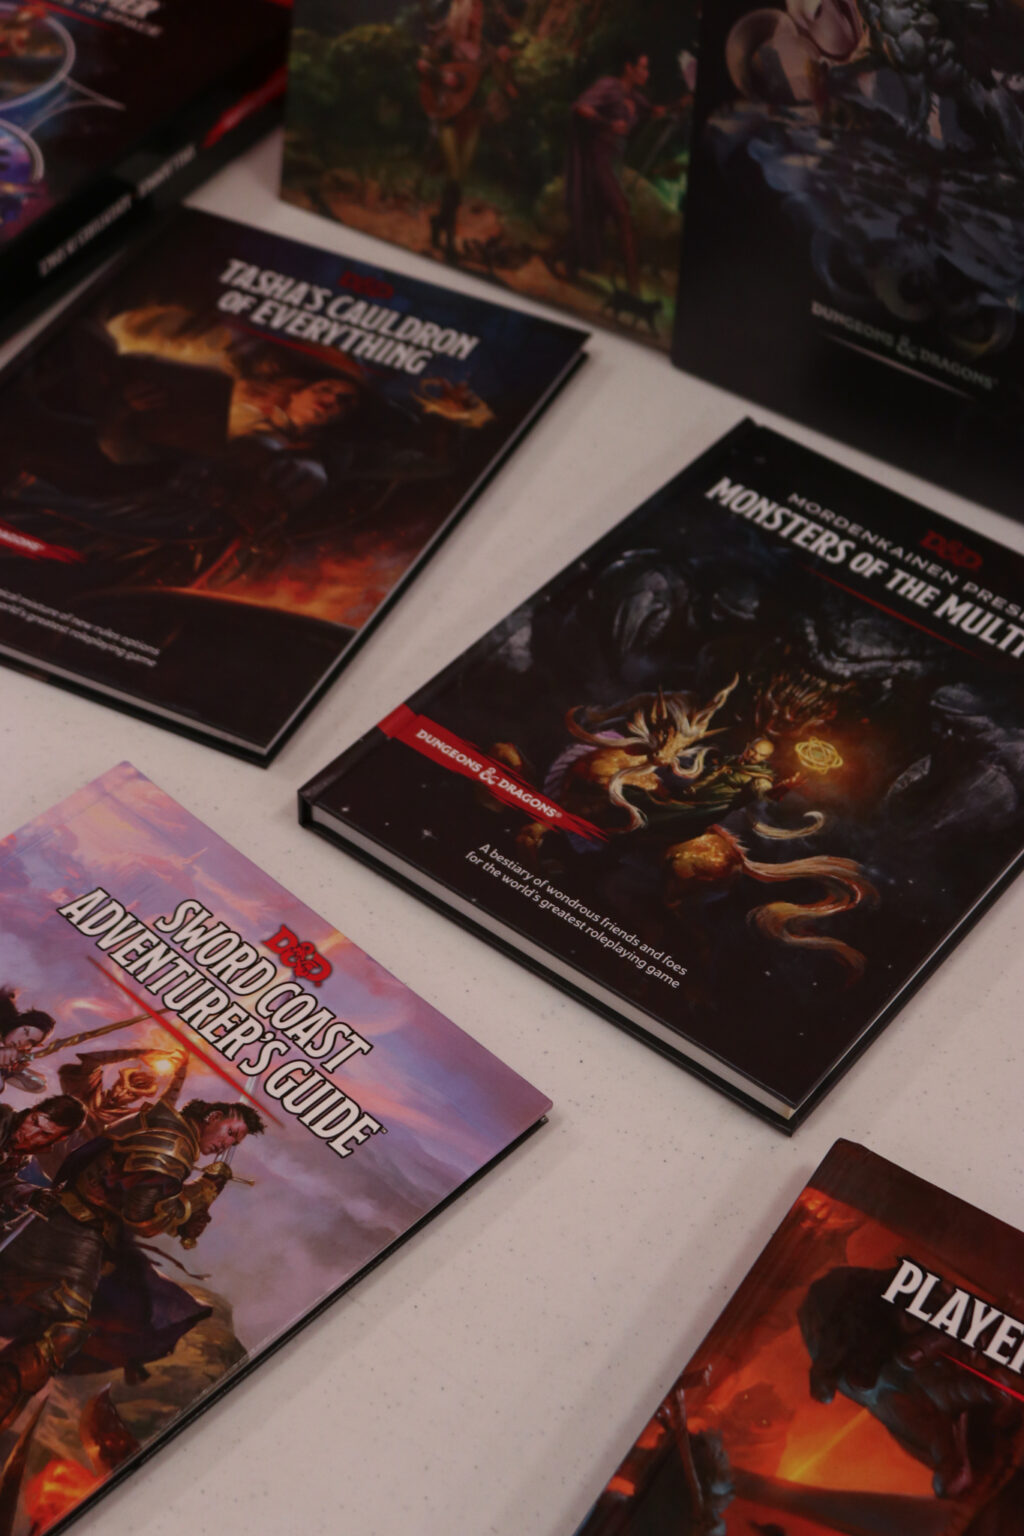 Orcs and elves and dragons, oh my! D&D club brings fantasy to WSU Vancouver